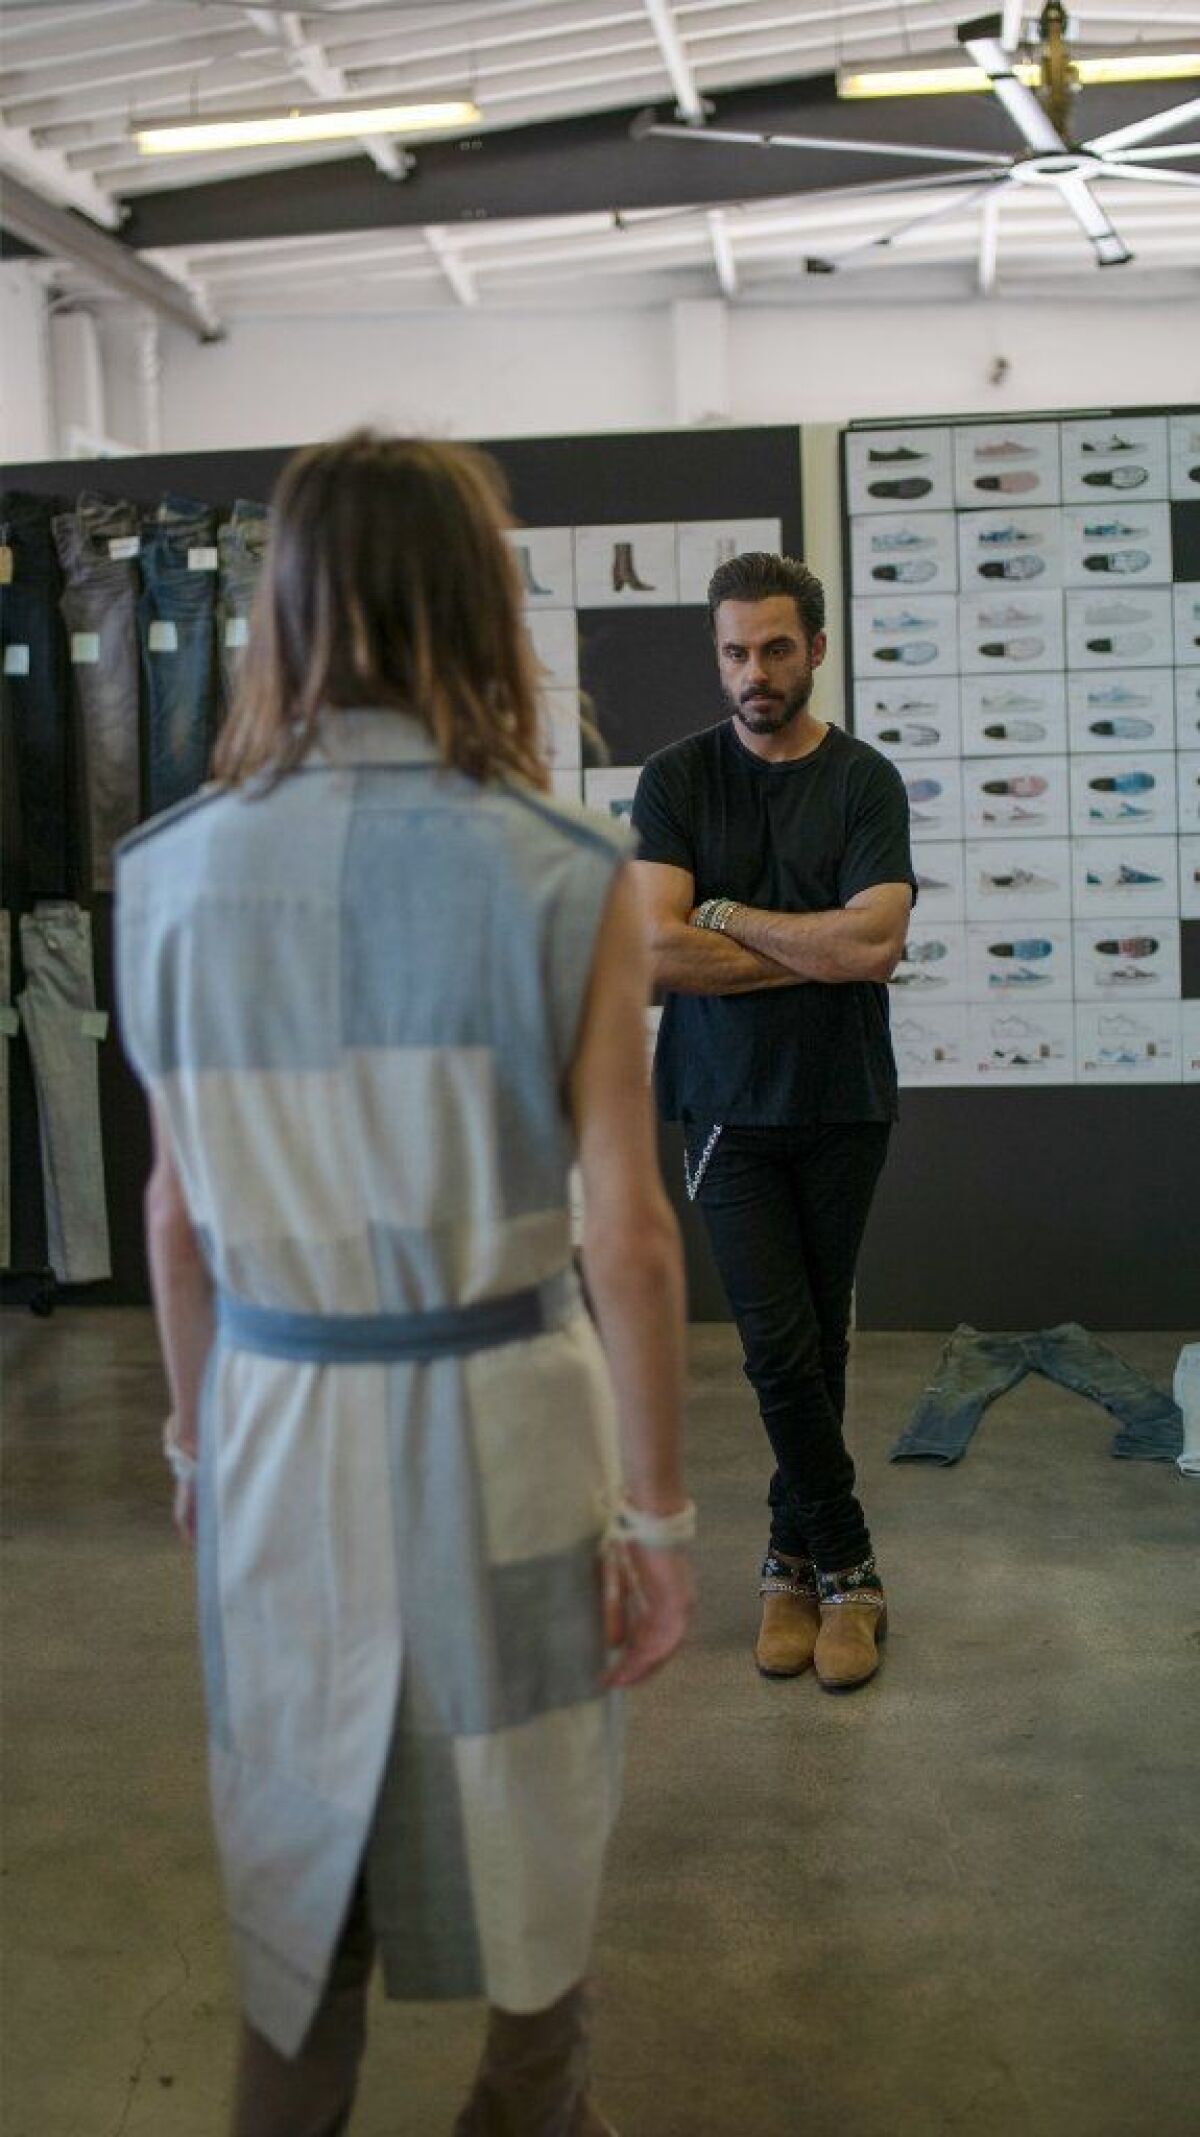 Mike Amiri surveys a recent design during a fitting session at his downtown L.A. studio. Among the celebrities wearing his clothes are Jay-Z, Kendrick Lamar and Gigi Hadid.